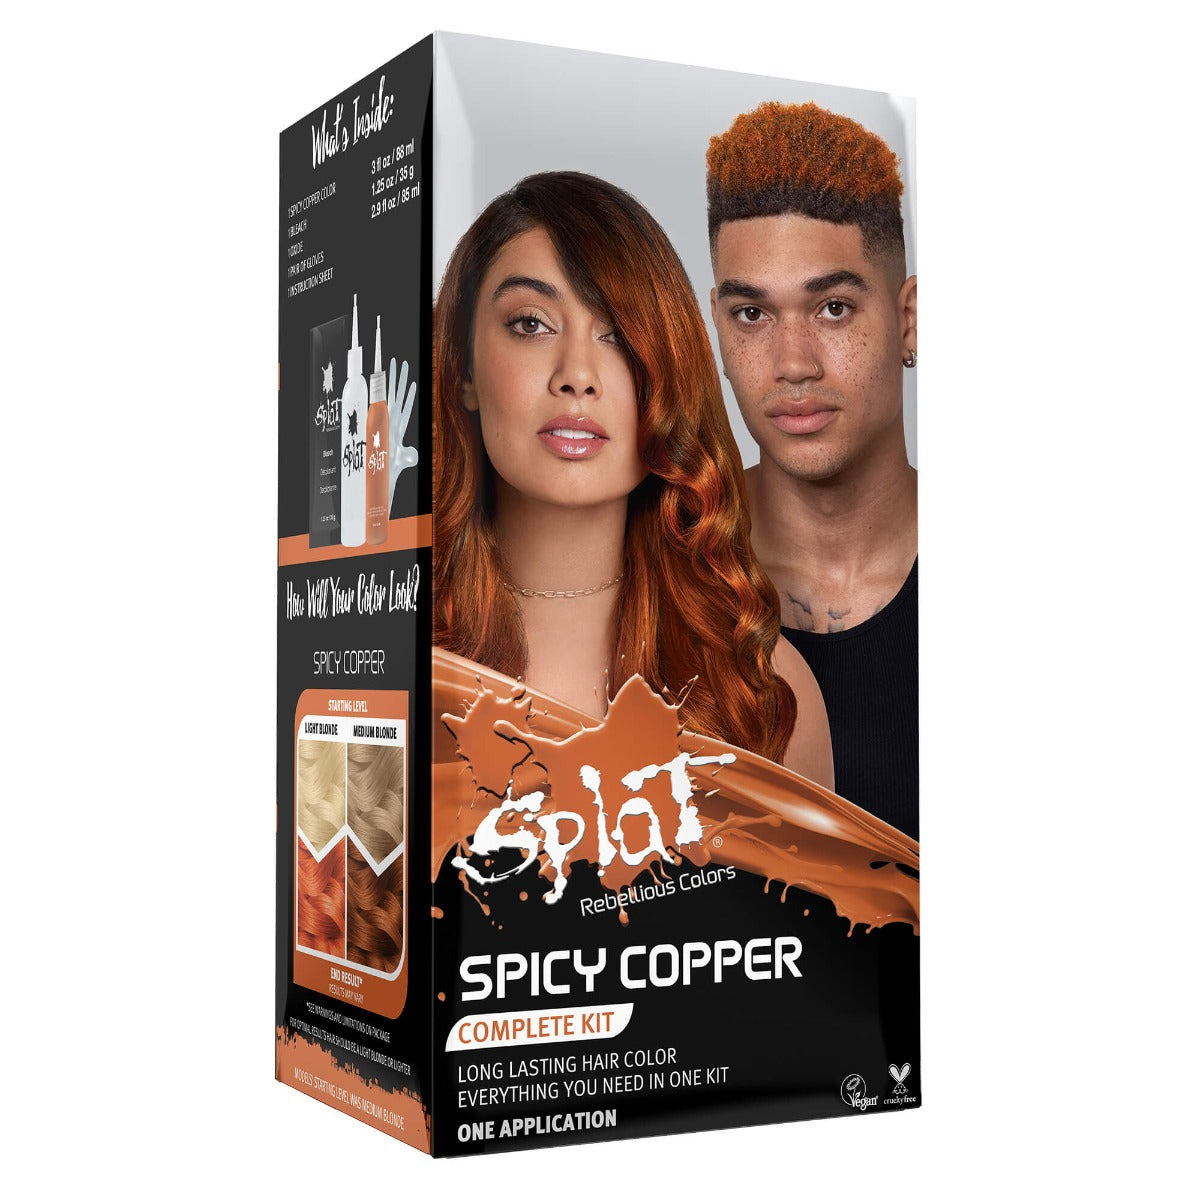 A box of Splat Hair Color's Spicy Copper Hair Dye